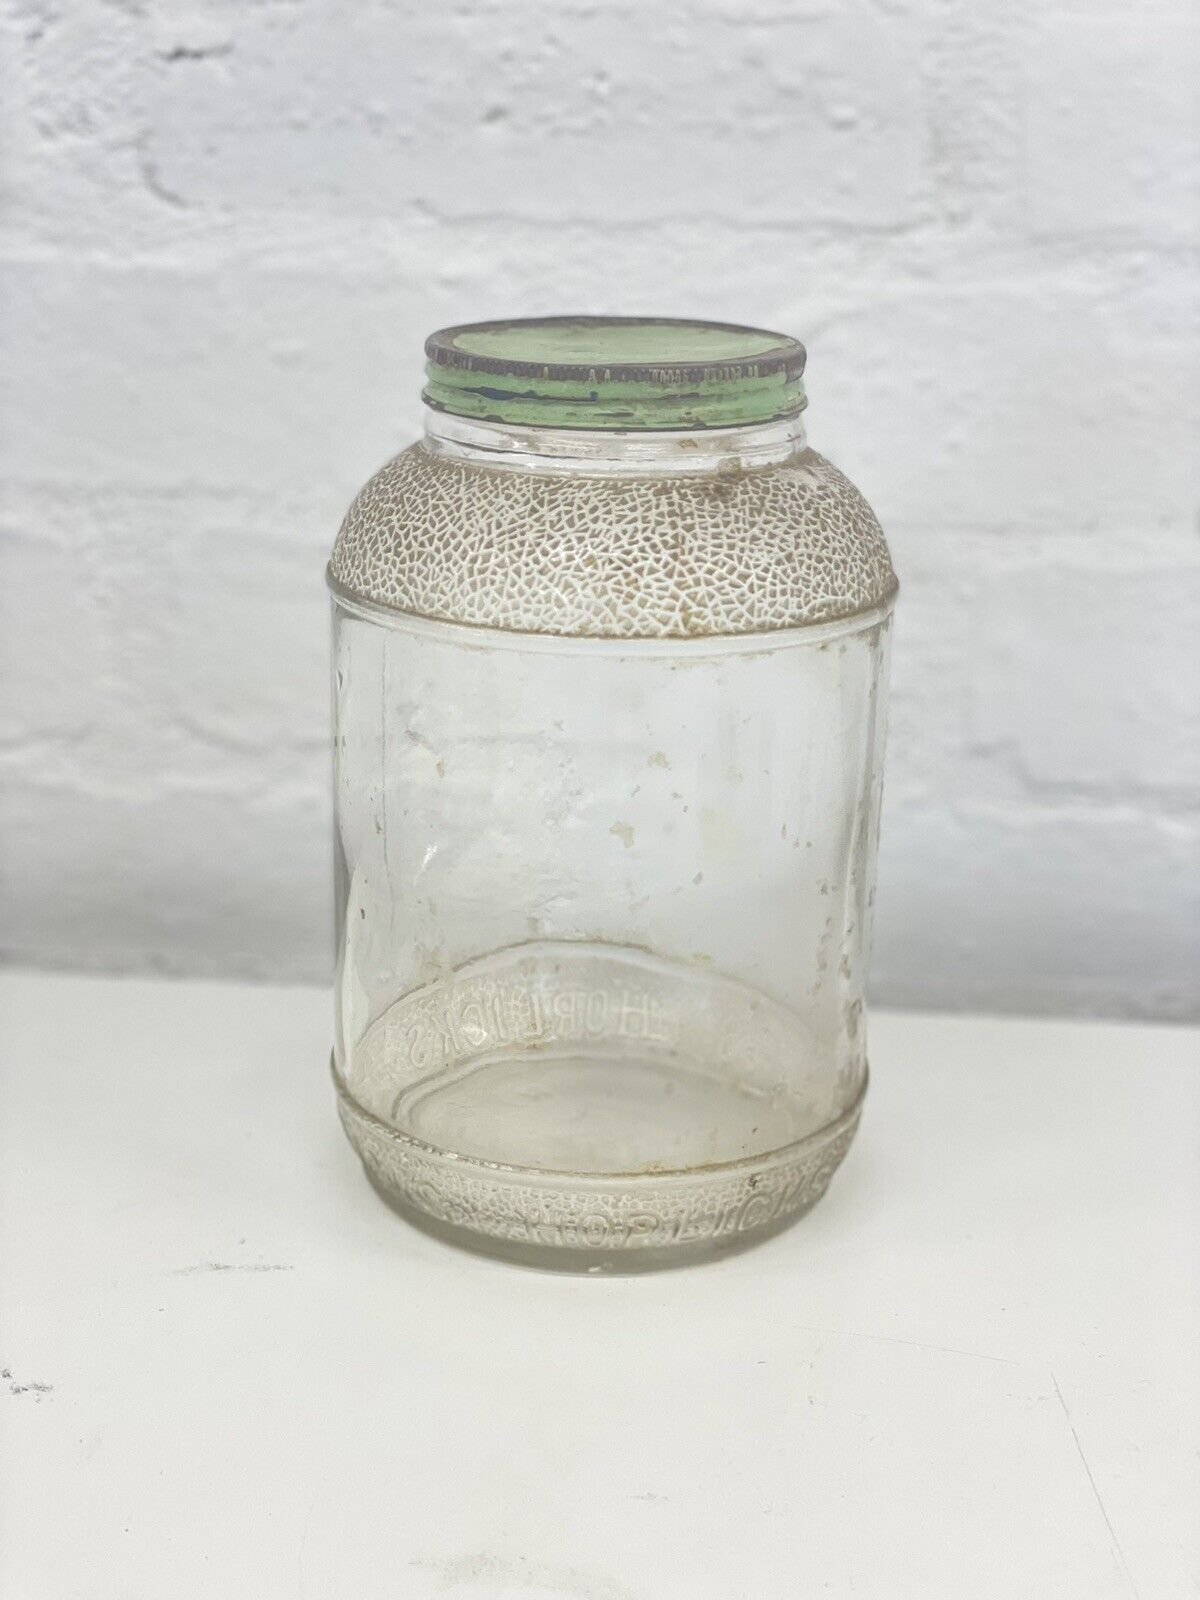 OLD VINTAGE RARE UNIQUE CLEAR GLASS ENGRAVED HORLICKS GLASS JAR WITH TIN LID